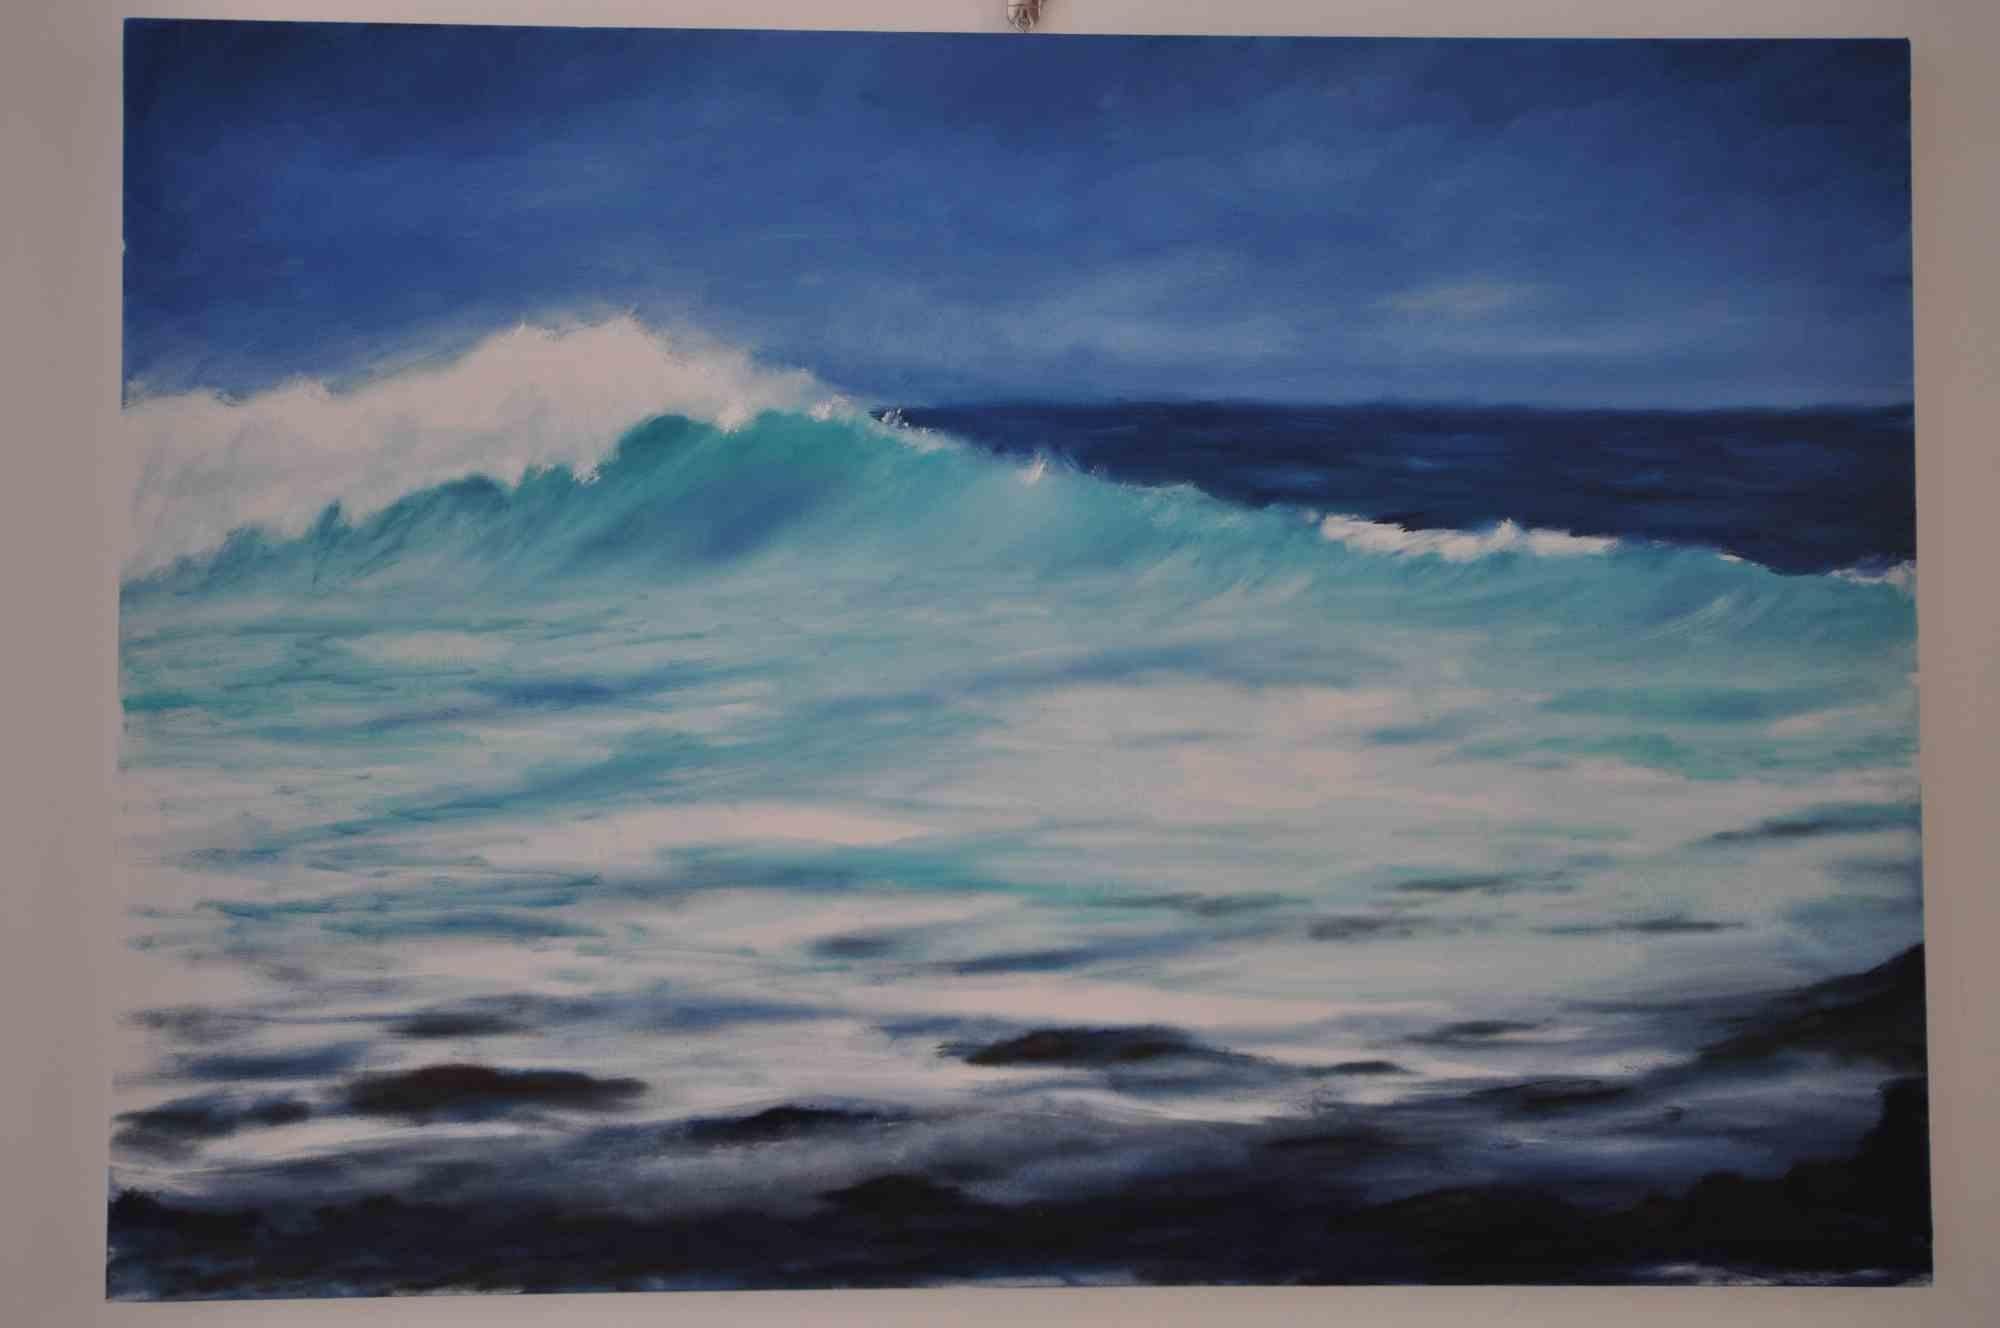 Australian Waves is an original artwork realized by the Italian artist Adriano Bernetti da Vila in 2018.

Hand-signed oil and acrylic on canvas 70 x 100 cm. The artwork conveys a sense of stenght and calm through the representation of energetic